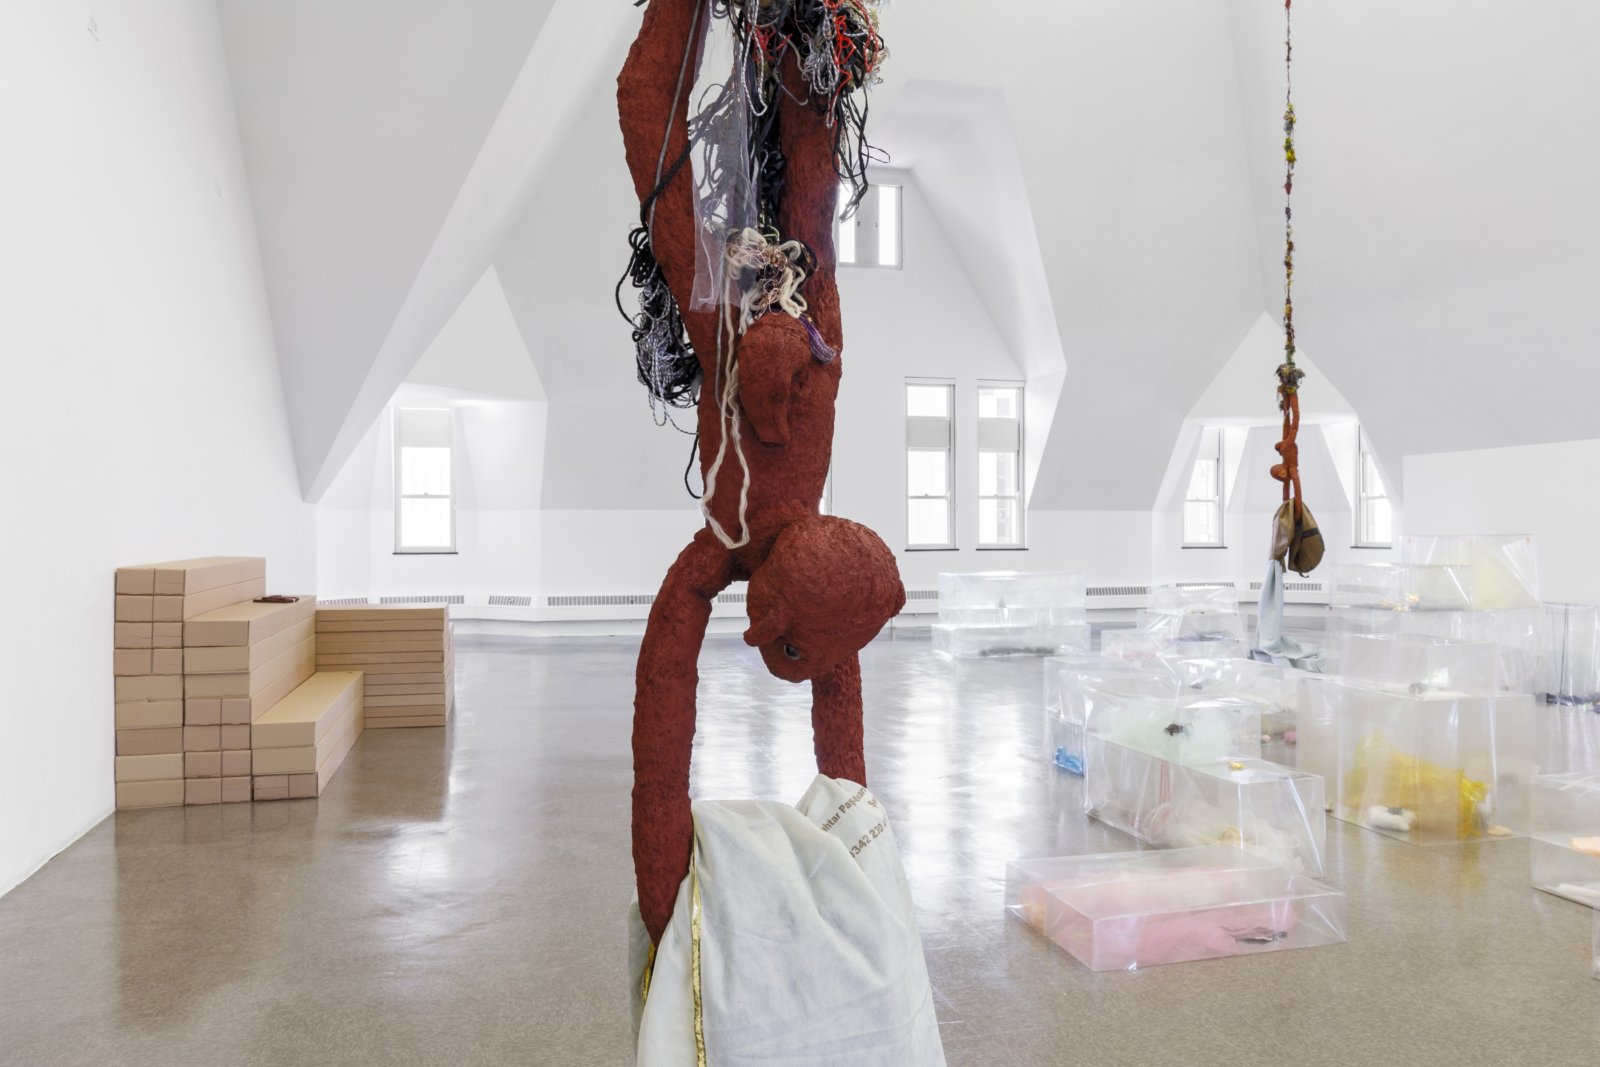 Liz Magor, Delivery (red) (detail), 2018, silicone rubber, textiles, twine, 144 x 24 x 13 in. (366 x 61 x 32 cm). Installation view, BLOWOUT, The Renaissance Society, Chicago, USA, 2019